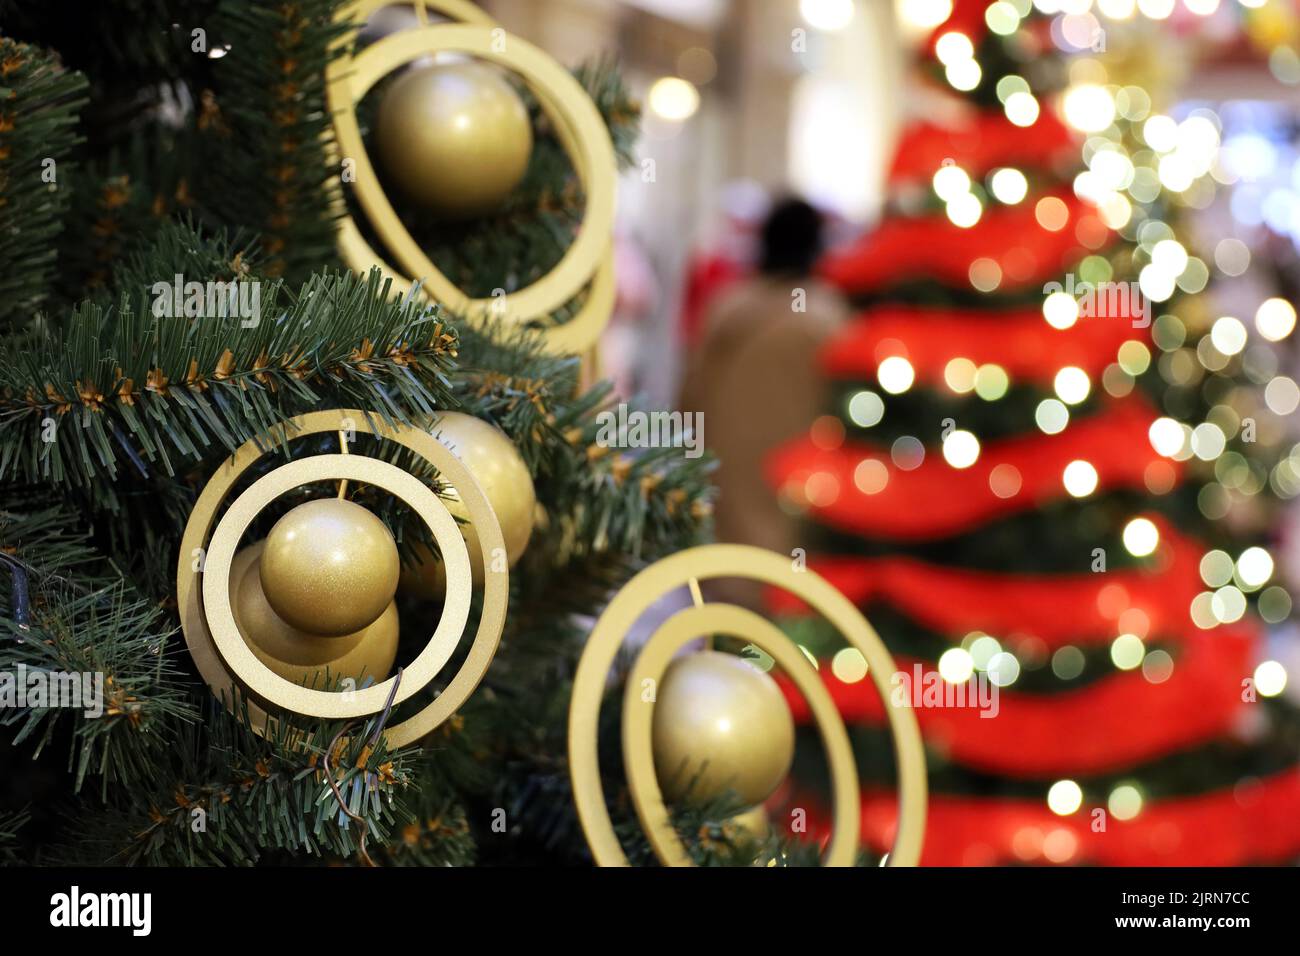 Christmas tree with golden toys in a shopping mall on background of blurred festive lights. New Year decorations, winter holidays and sale Stock Photo